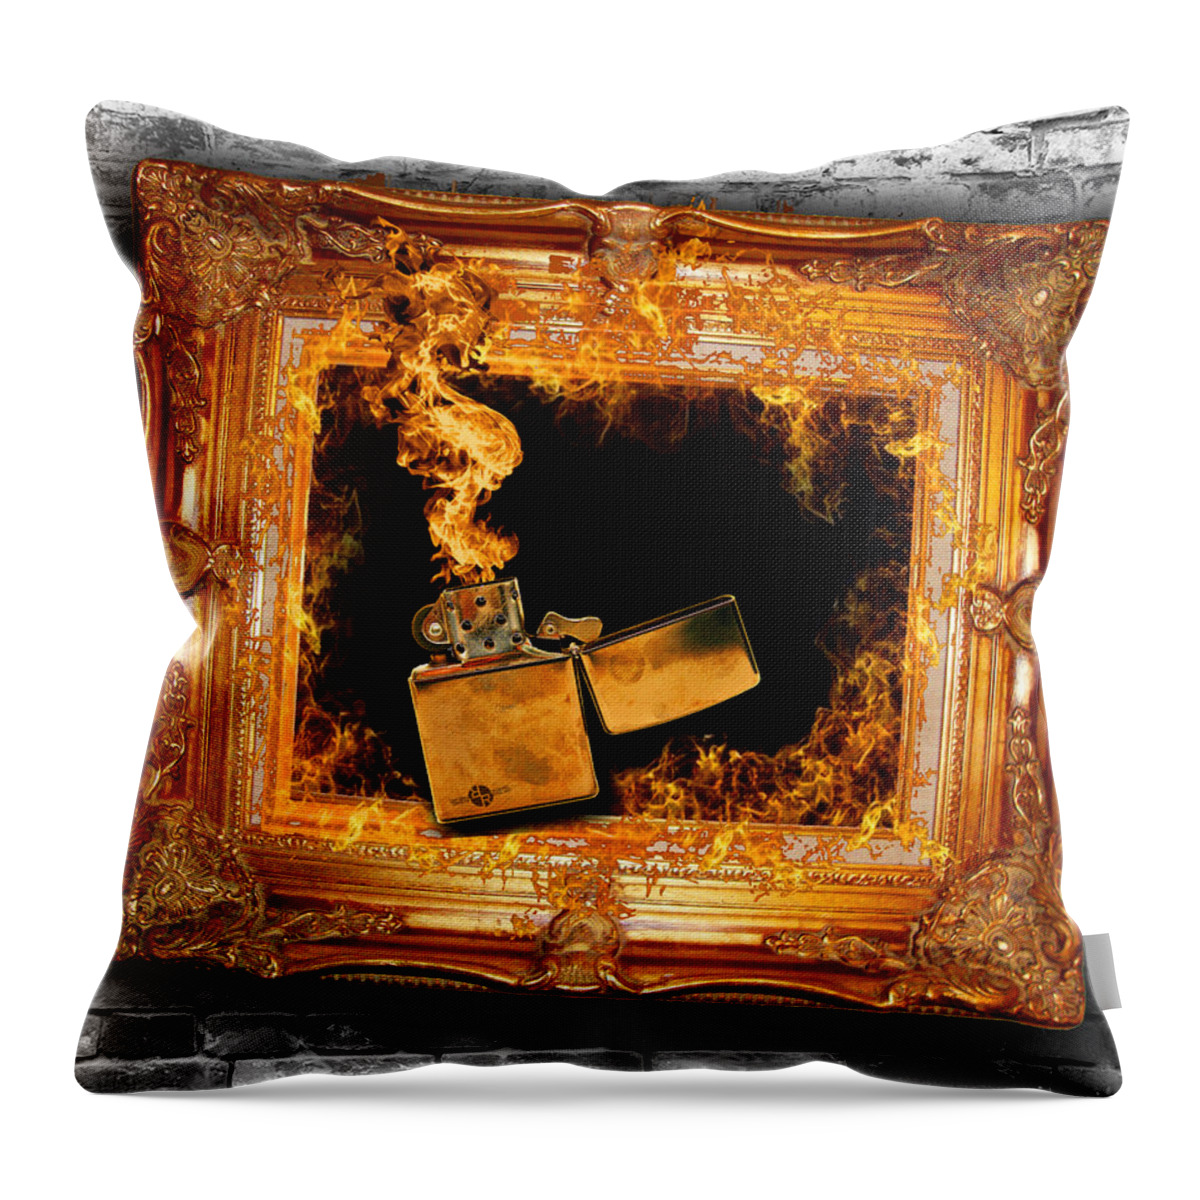 Zippo Lighter Throw Pillow featuring the painting Frame Fire Lighter Hot Heat by Tony Rubino